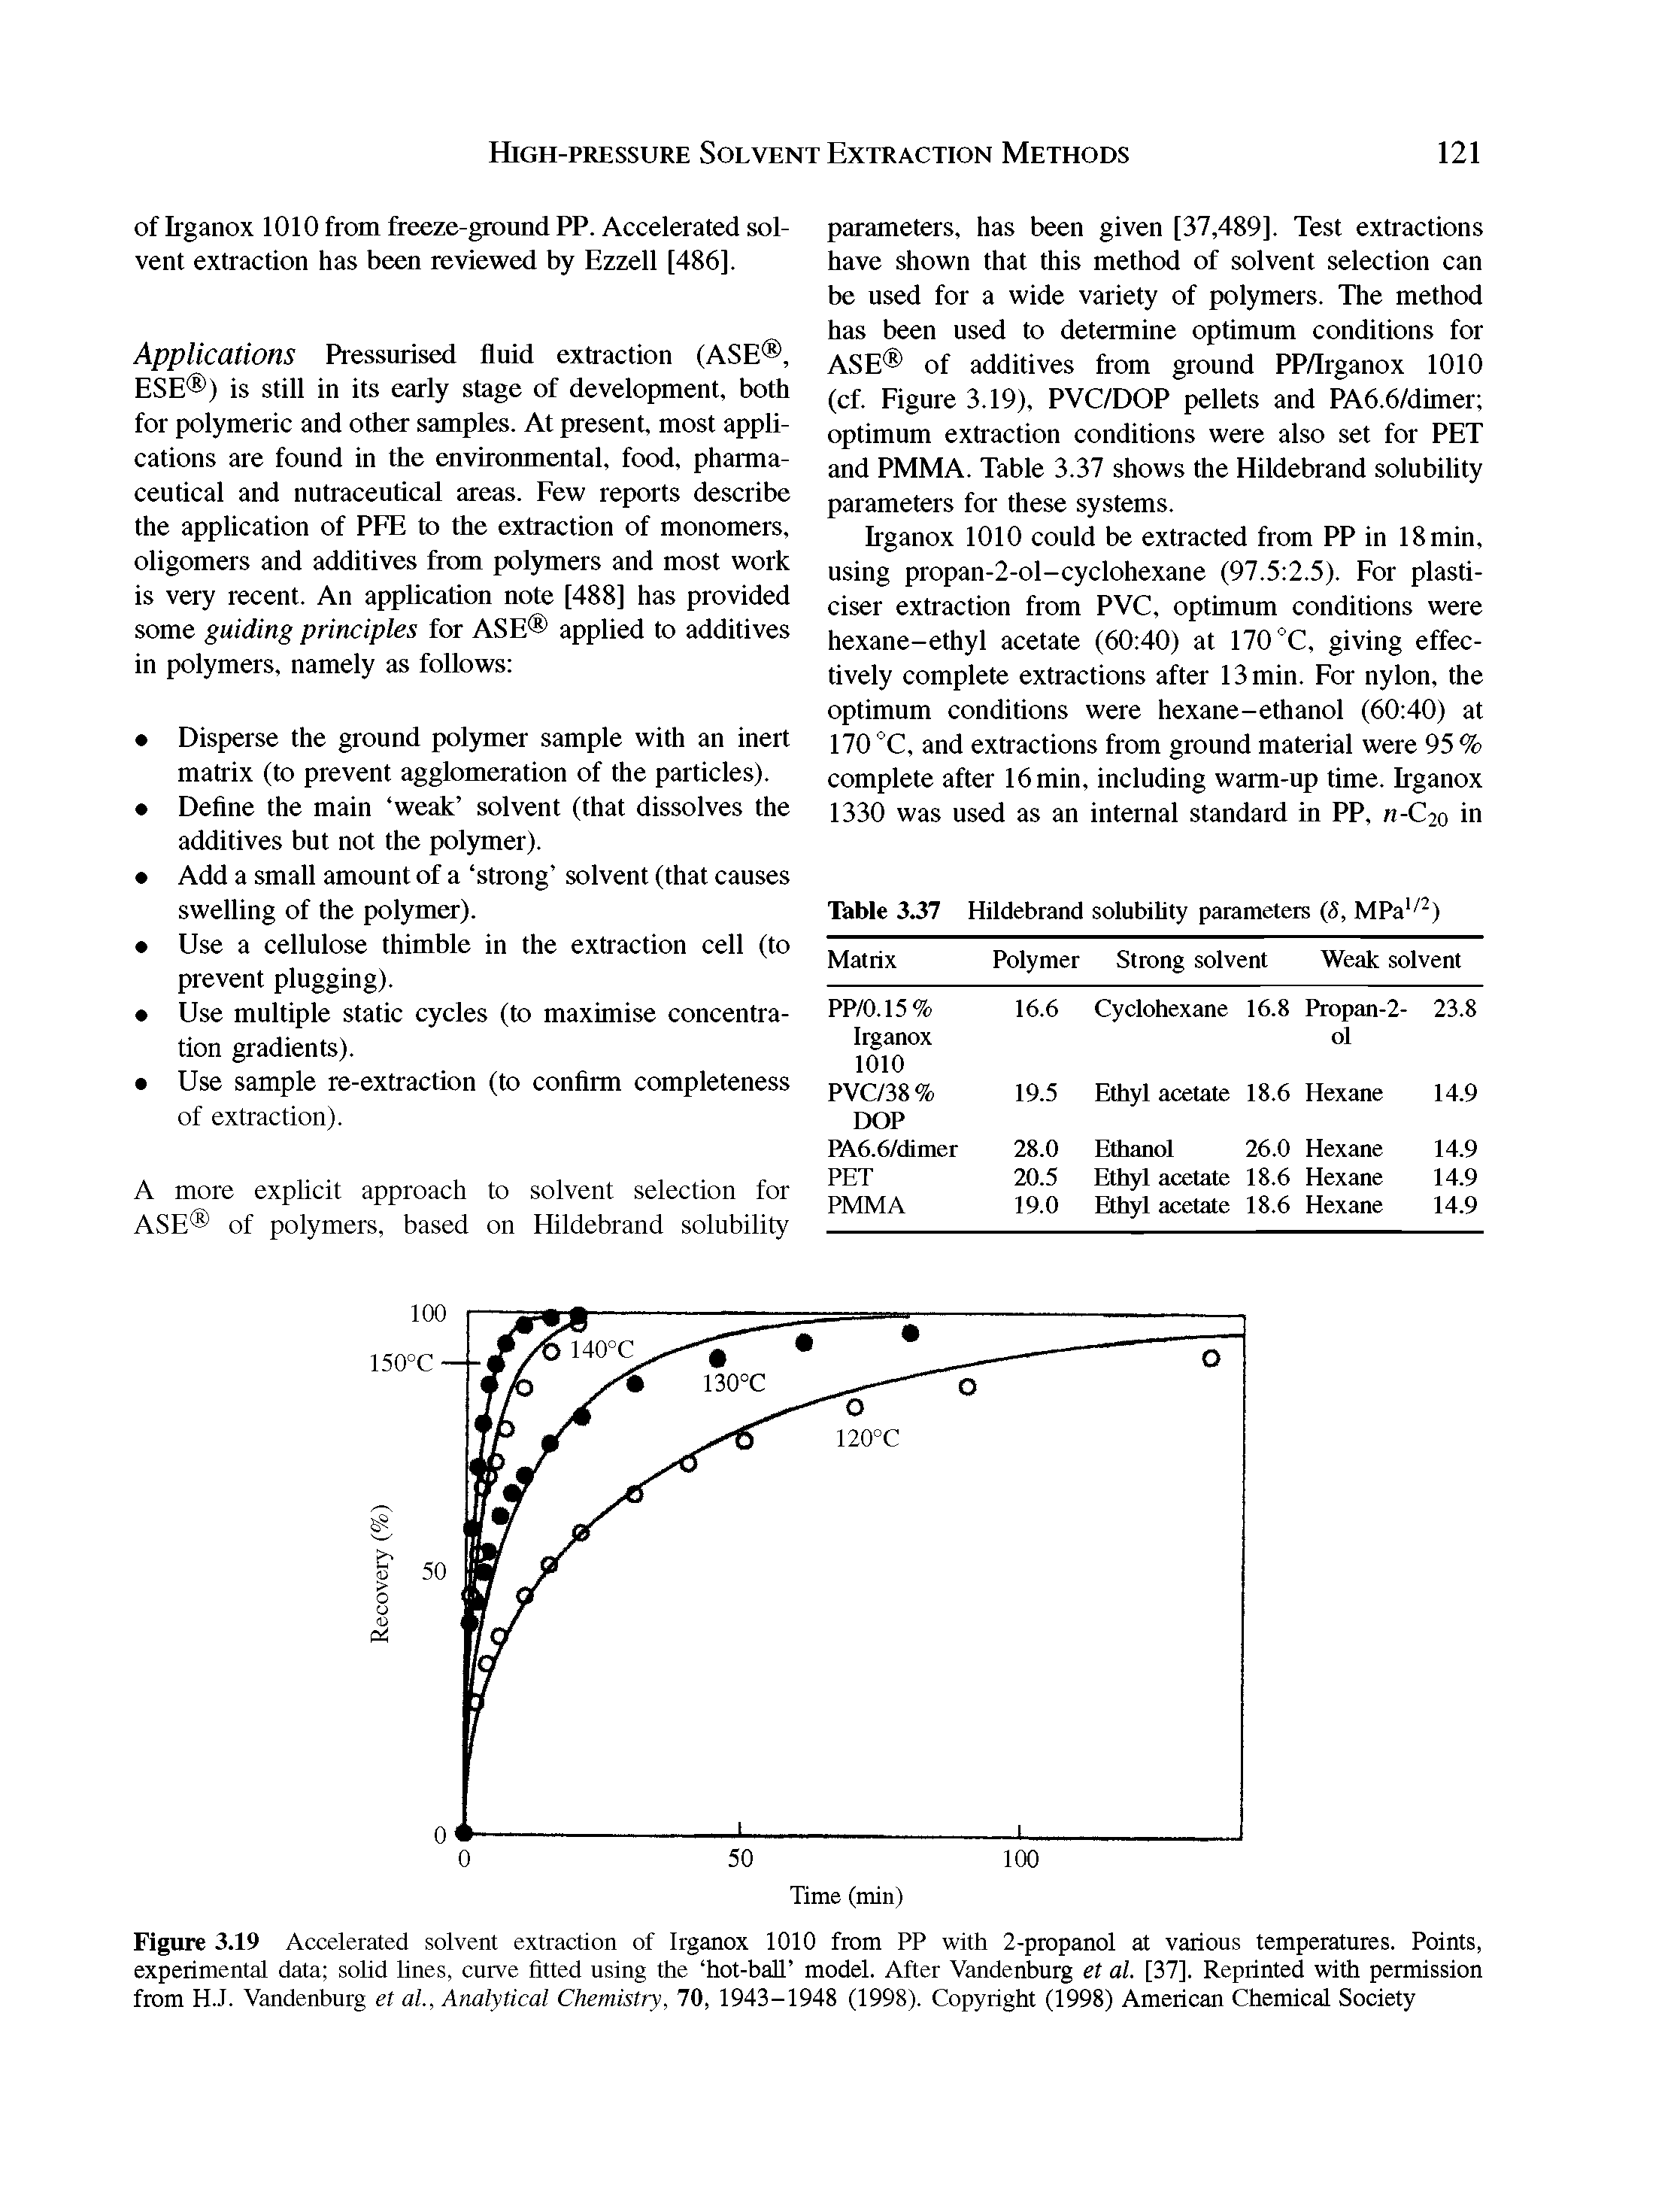 Figure 3.19 Accelerated solvent extraction of Irganox 1010 from PP with 2-propanol at various temperatures. Points, experimental data solid lines, curve fitted using the hot-ball model. After Vandenburg et al. [37], Reprinted with permission from HJ. Vandenburg et al., Analytical Chemistry, 70, 1943-1948 (1998). Copyright (1998) American Chemical Society...